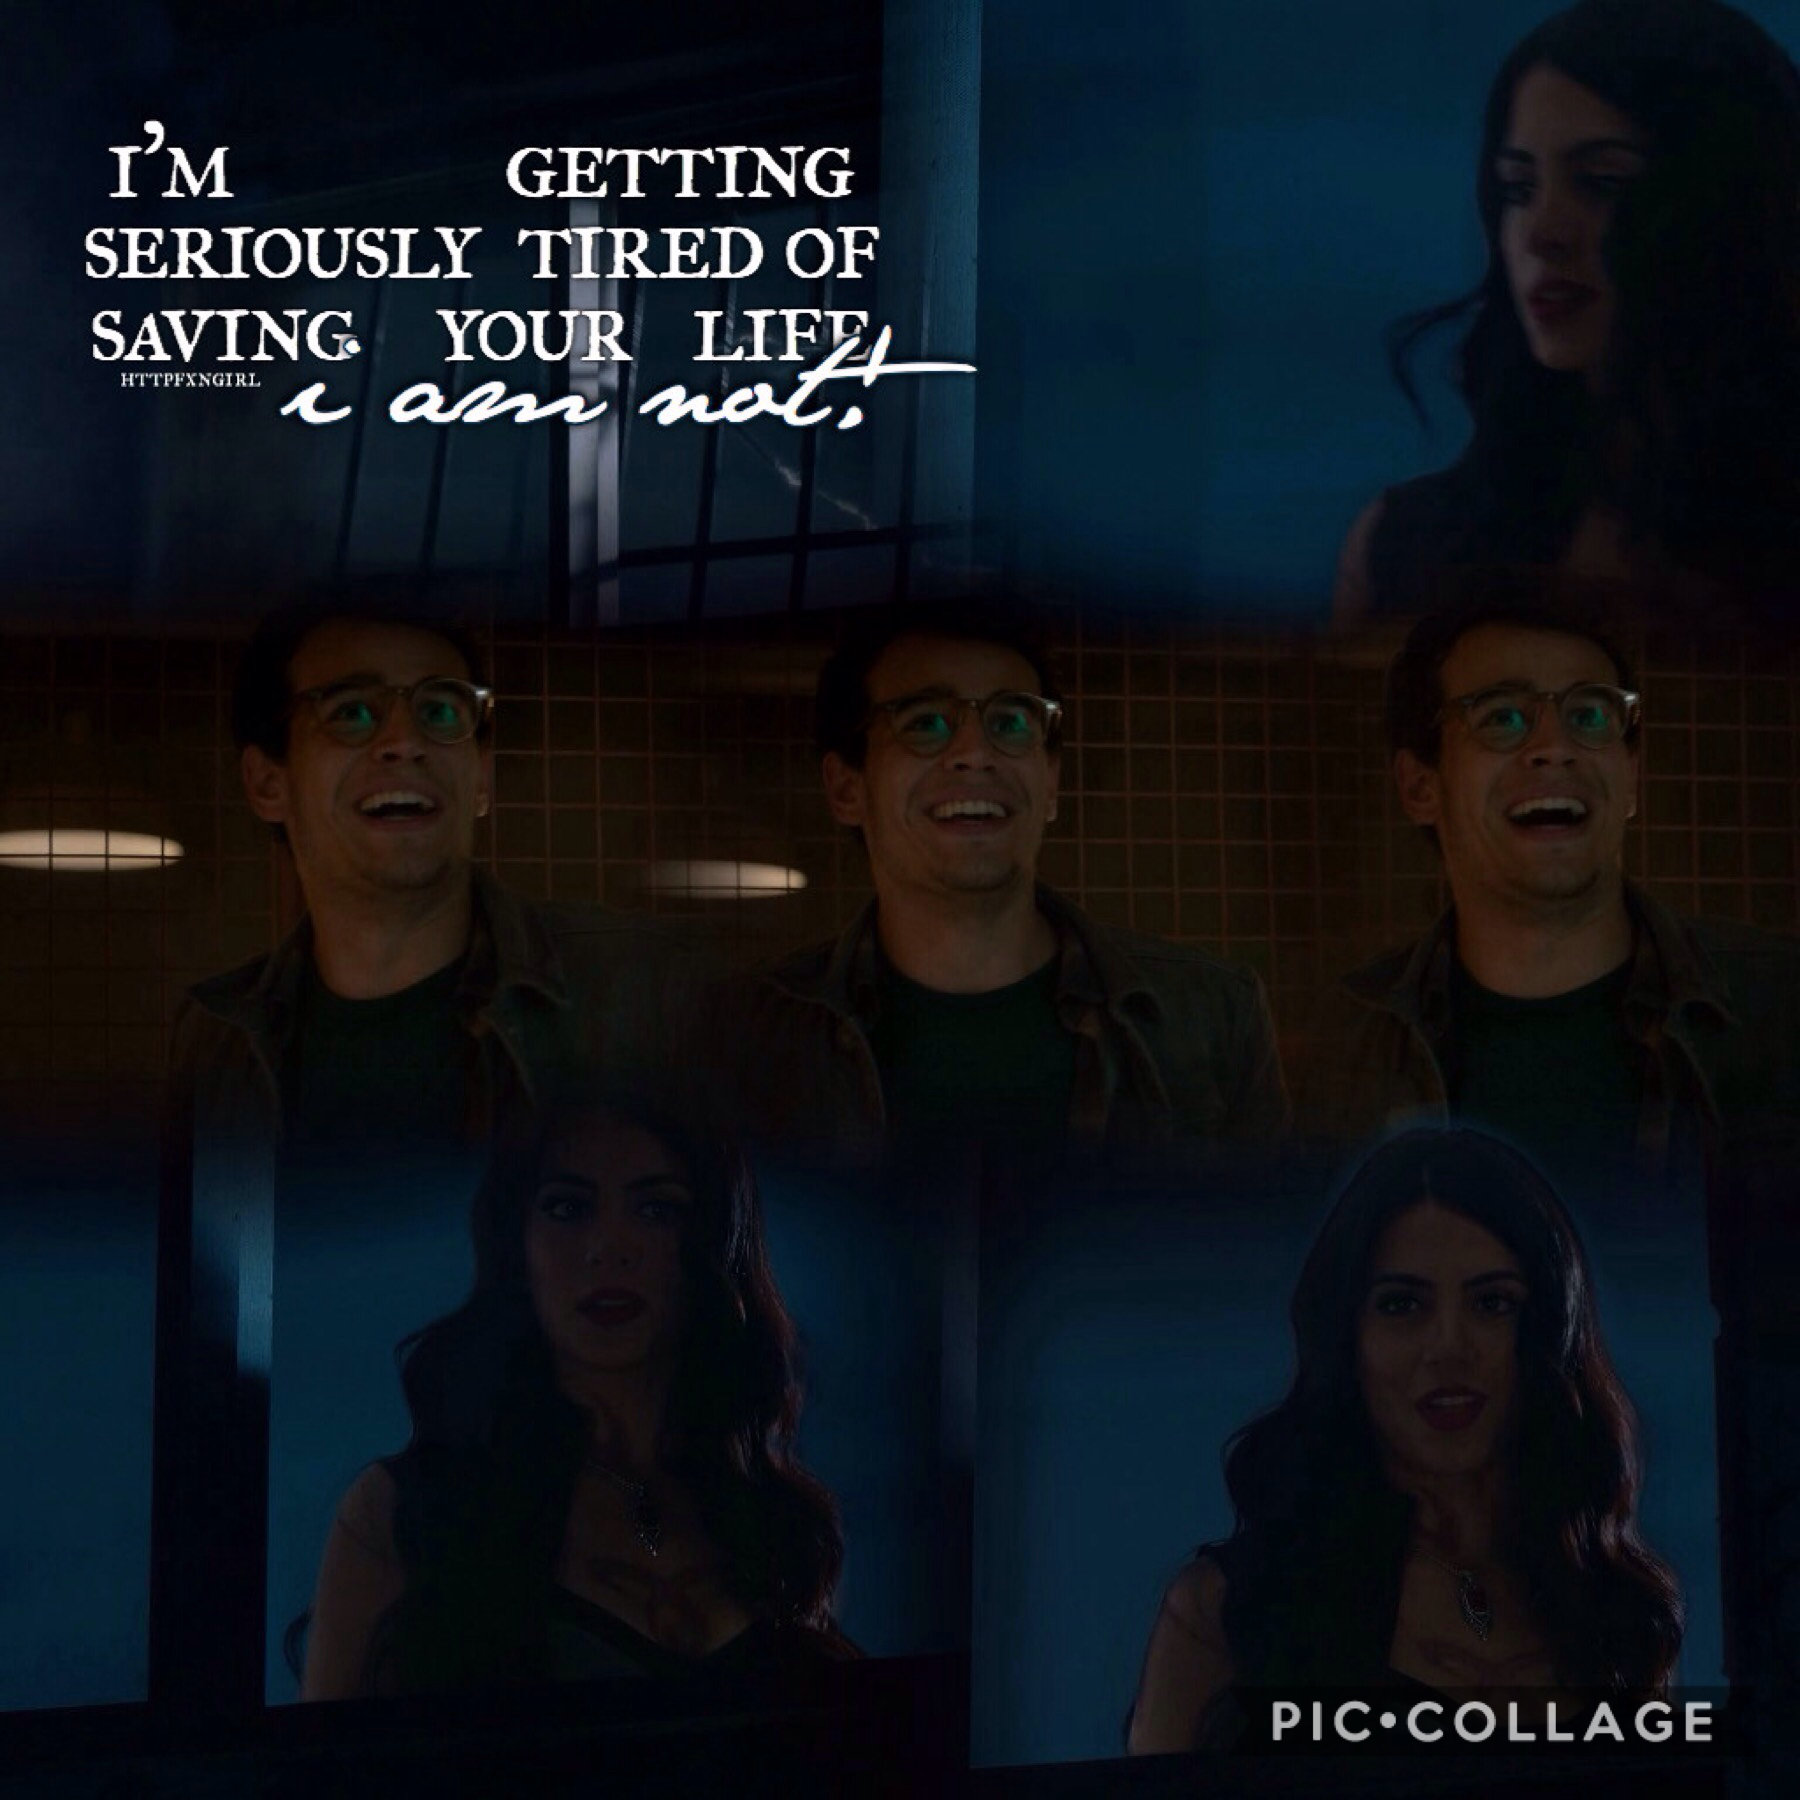 season 1 episode 5 — moo shu to go ➰
i hate this edit so much ewwwww 😭 but there are some waaaay better edits coming for the next few episodes 😉
q// simon before or after he became a vampire?
a// i actually really loved nerdy human simon haha 😂